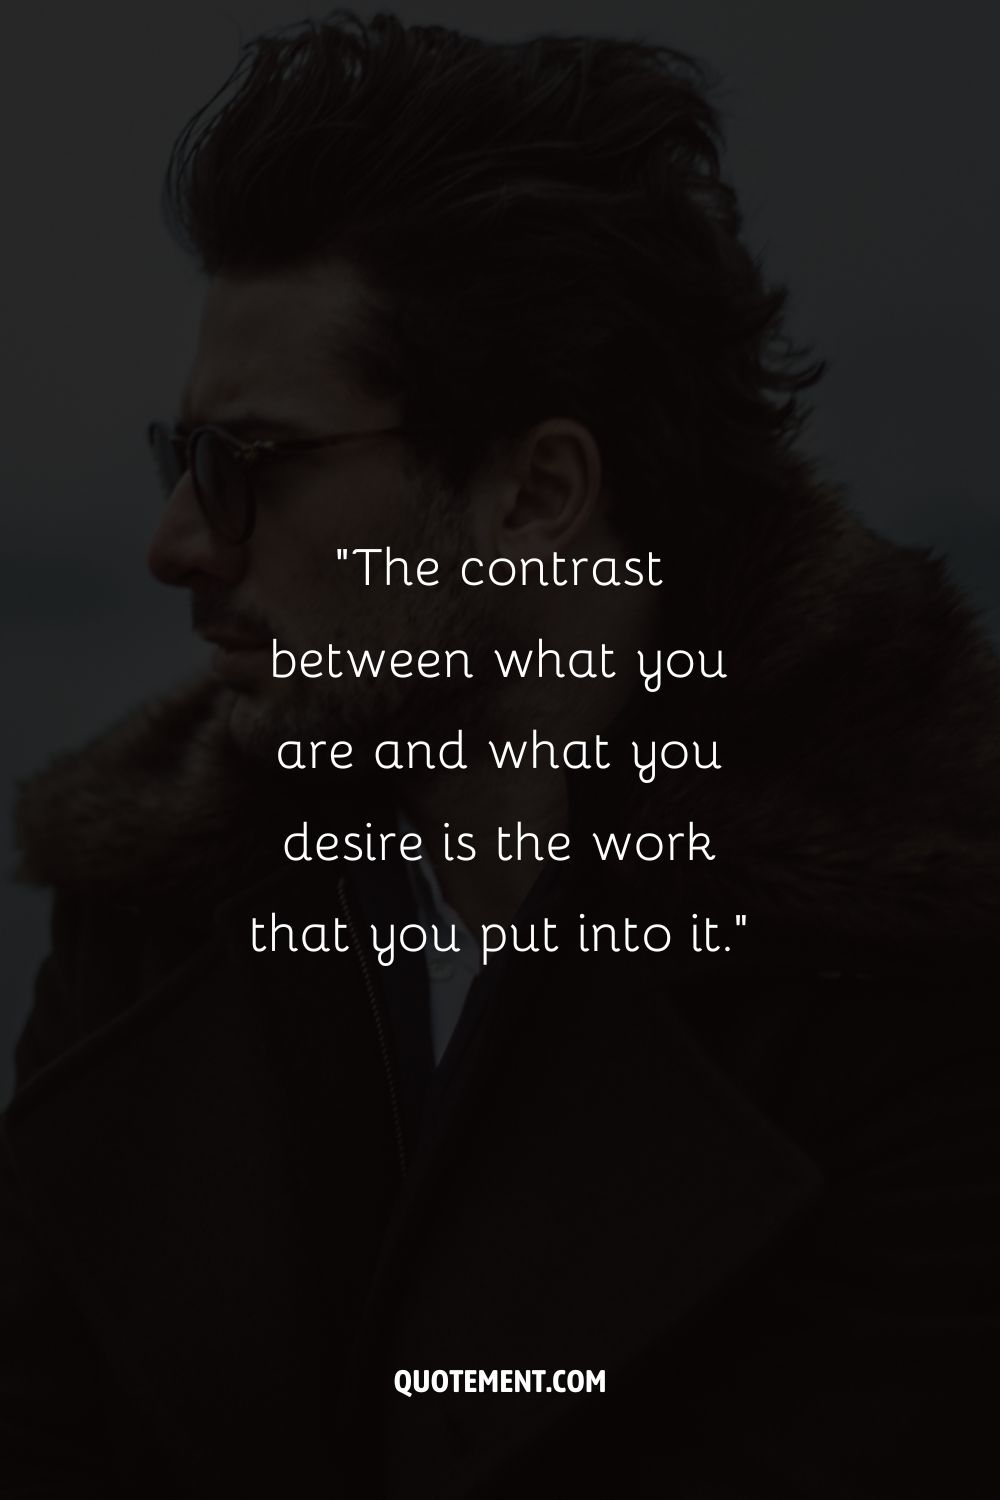 “The contrast between what you are and what you desire is the work that you put into it.”